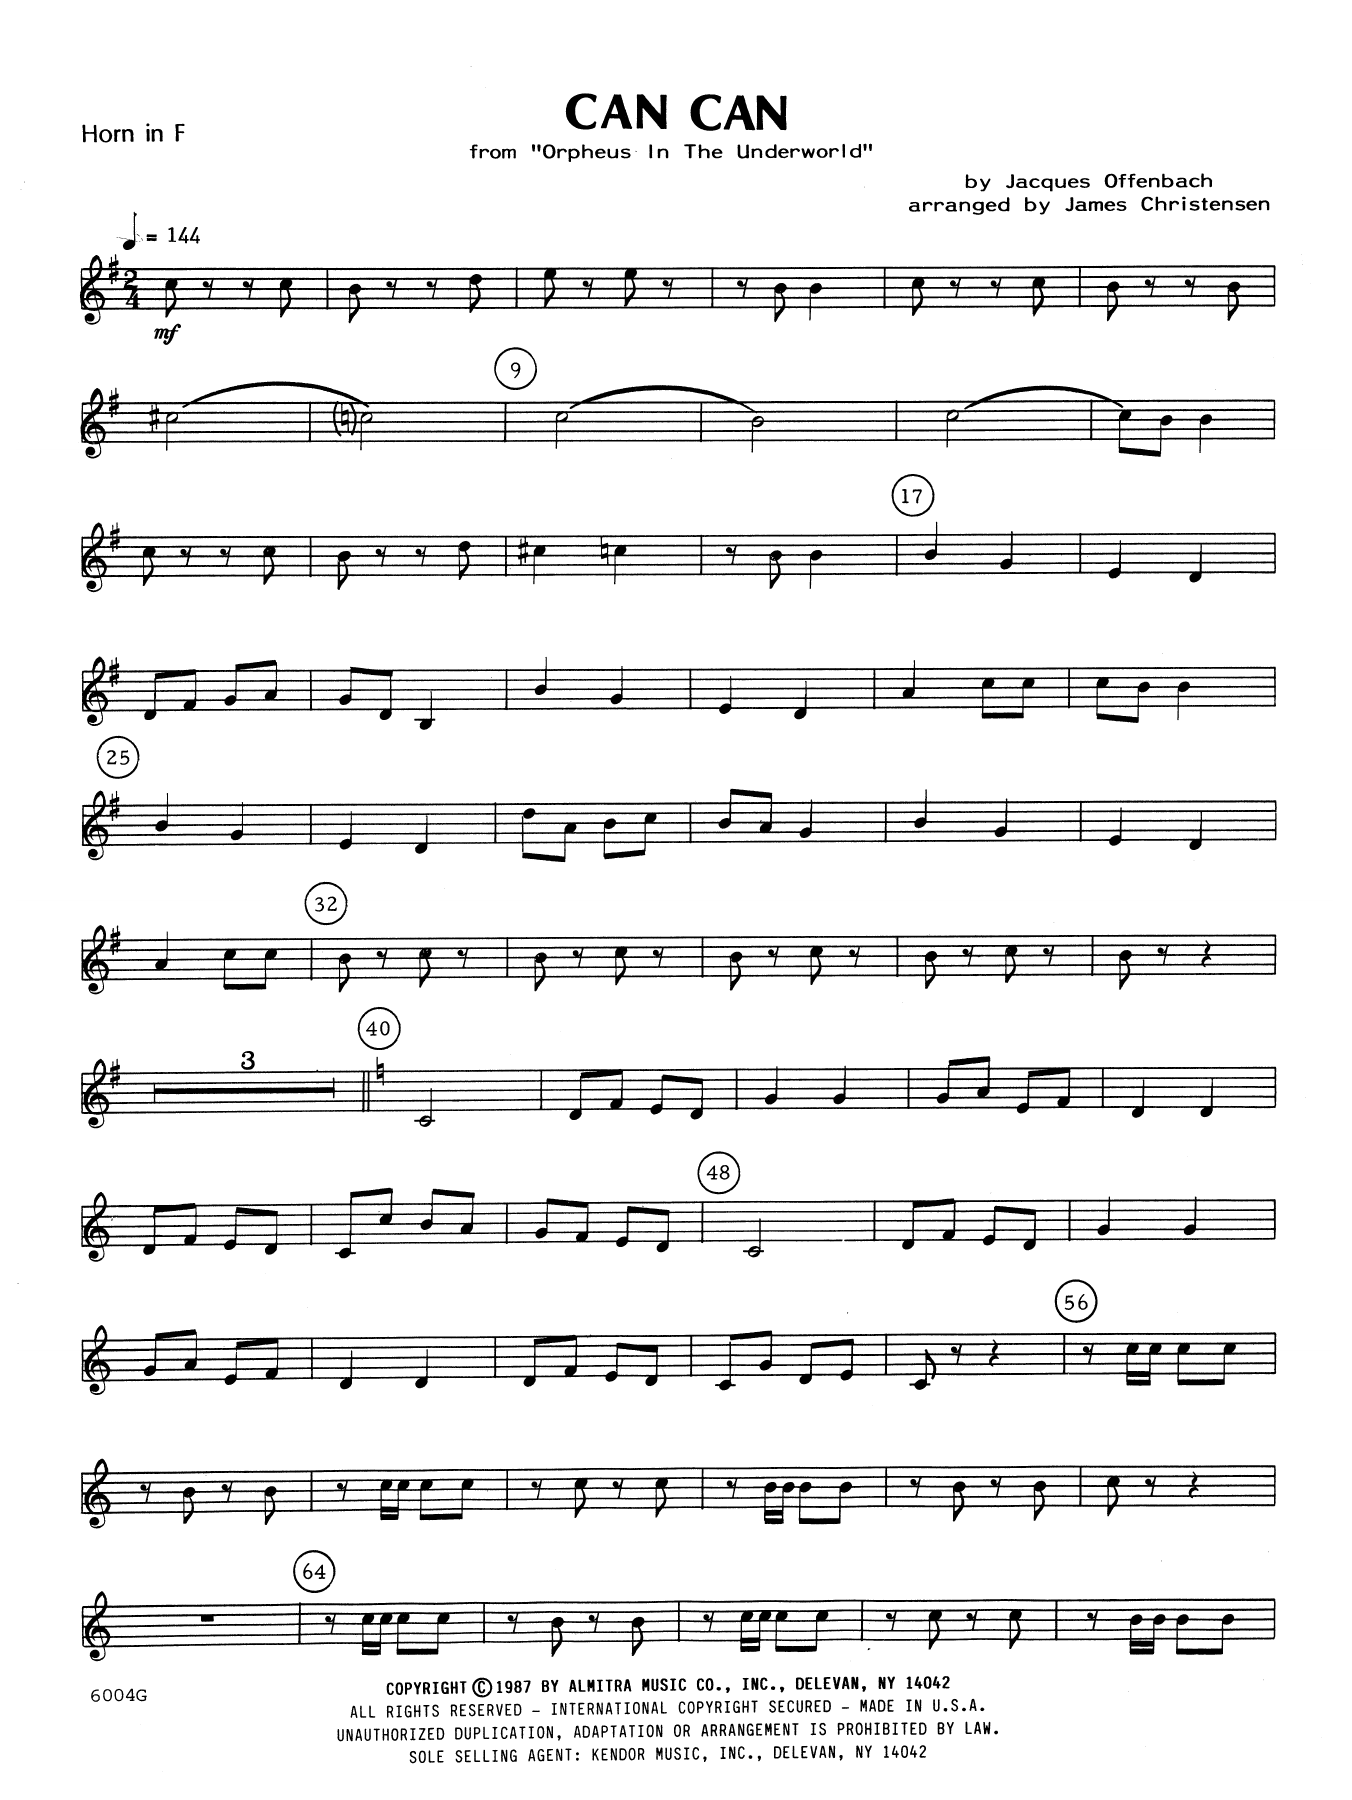 Download James Christensen Can Can - Horn in F Sheet Music